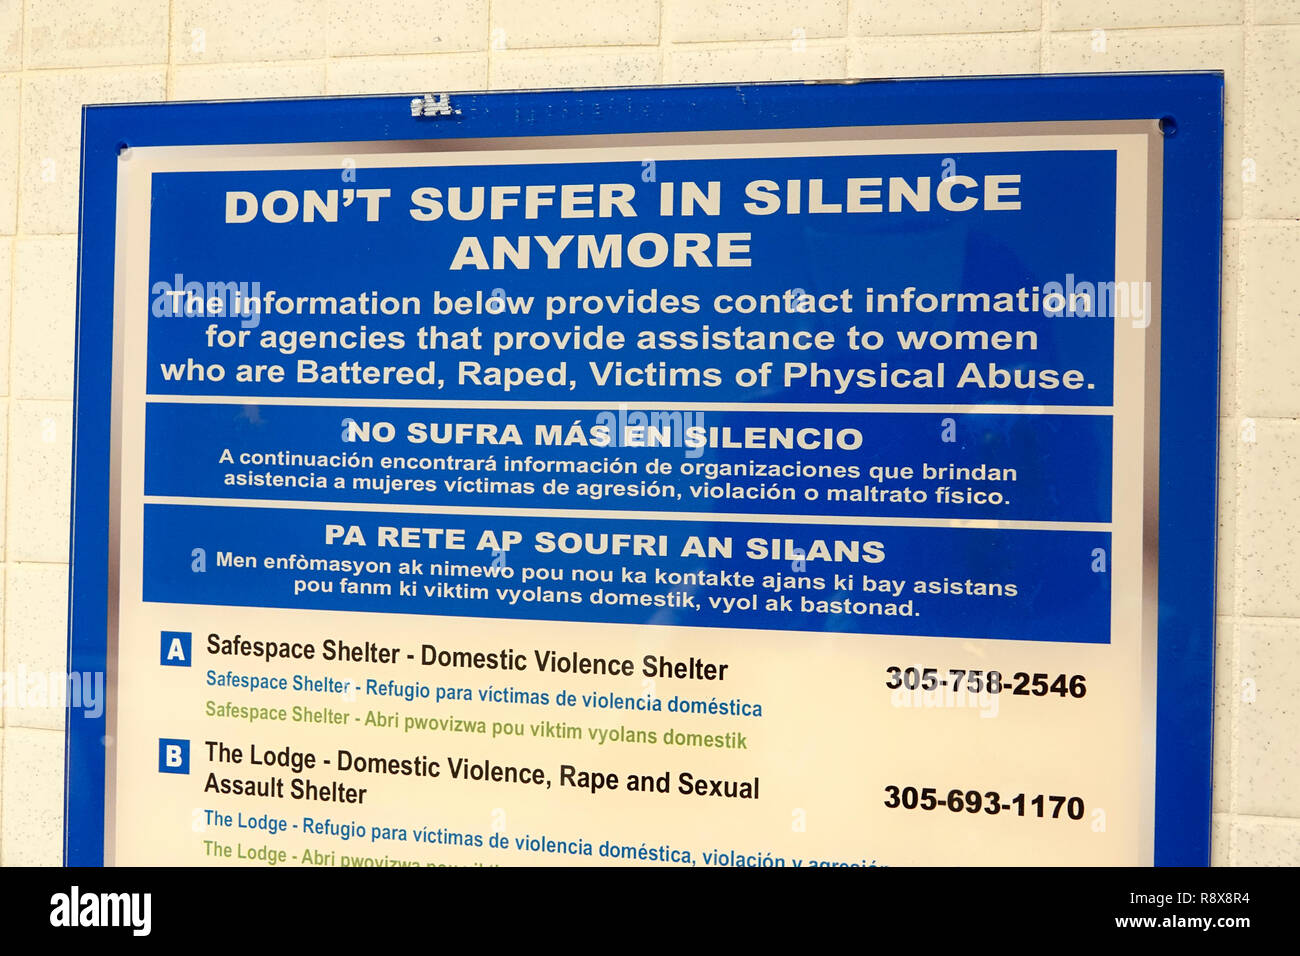 Miami Florida,downtown,message notice sign,battered raped physical abuse victims,English Spanish Creole multiple languages,FL181205060 Stock Photo